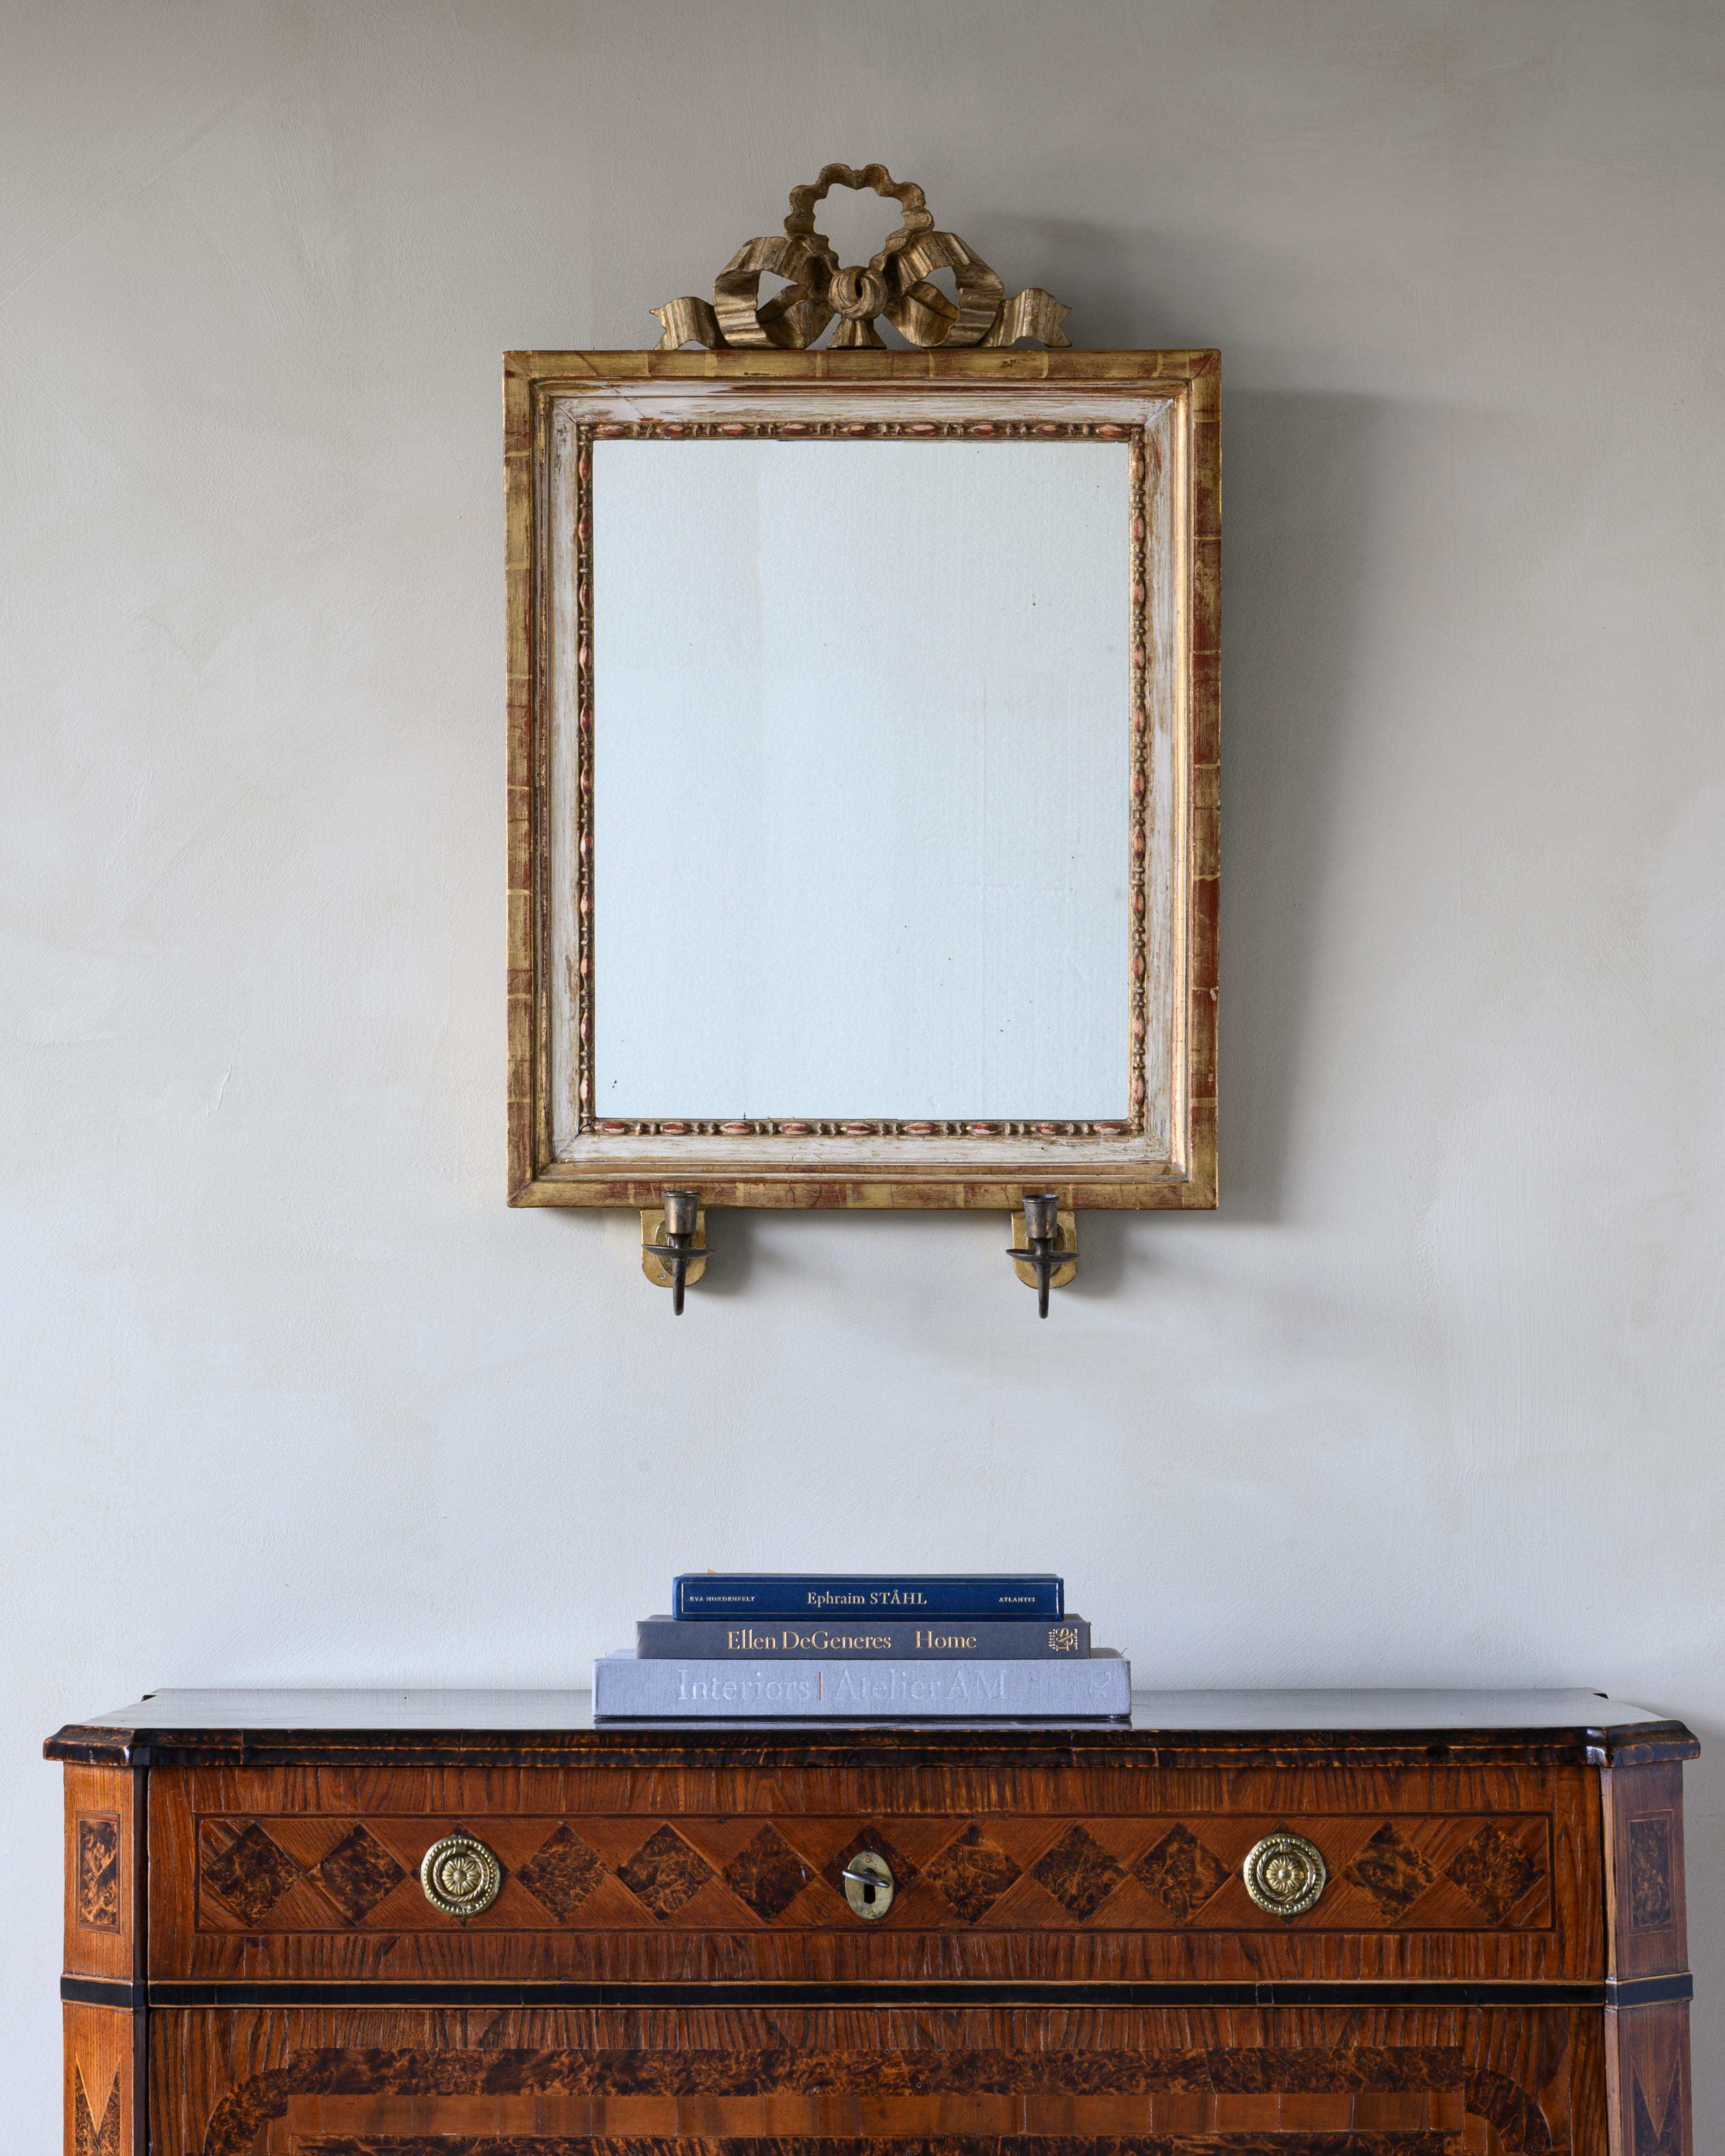 Charming 19th century Gustavian mirror scone with two candleholders, the top carving is removable, circa 1810.